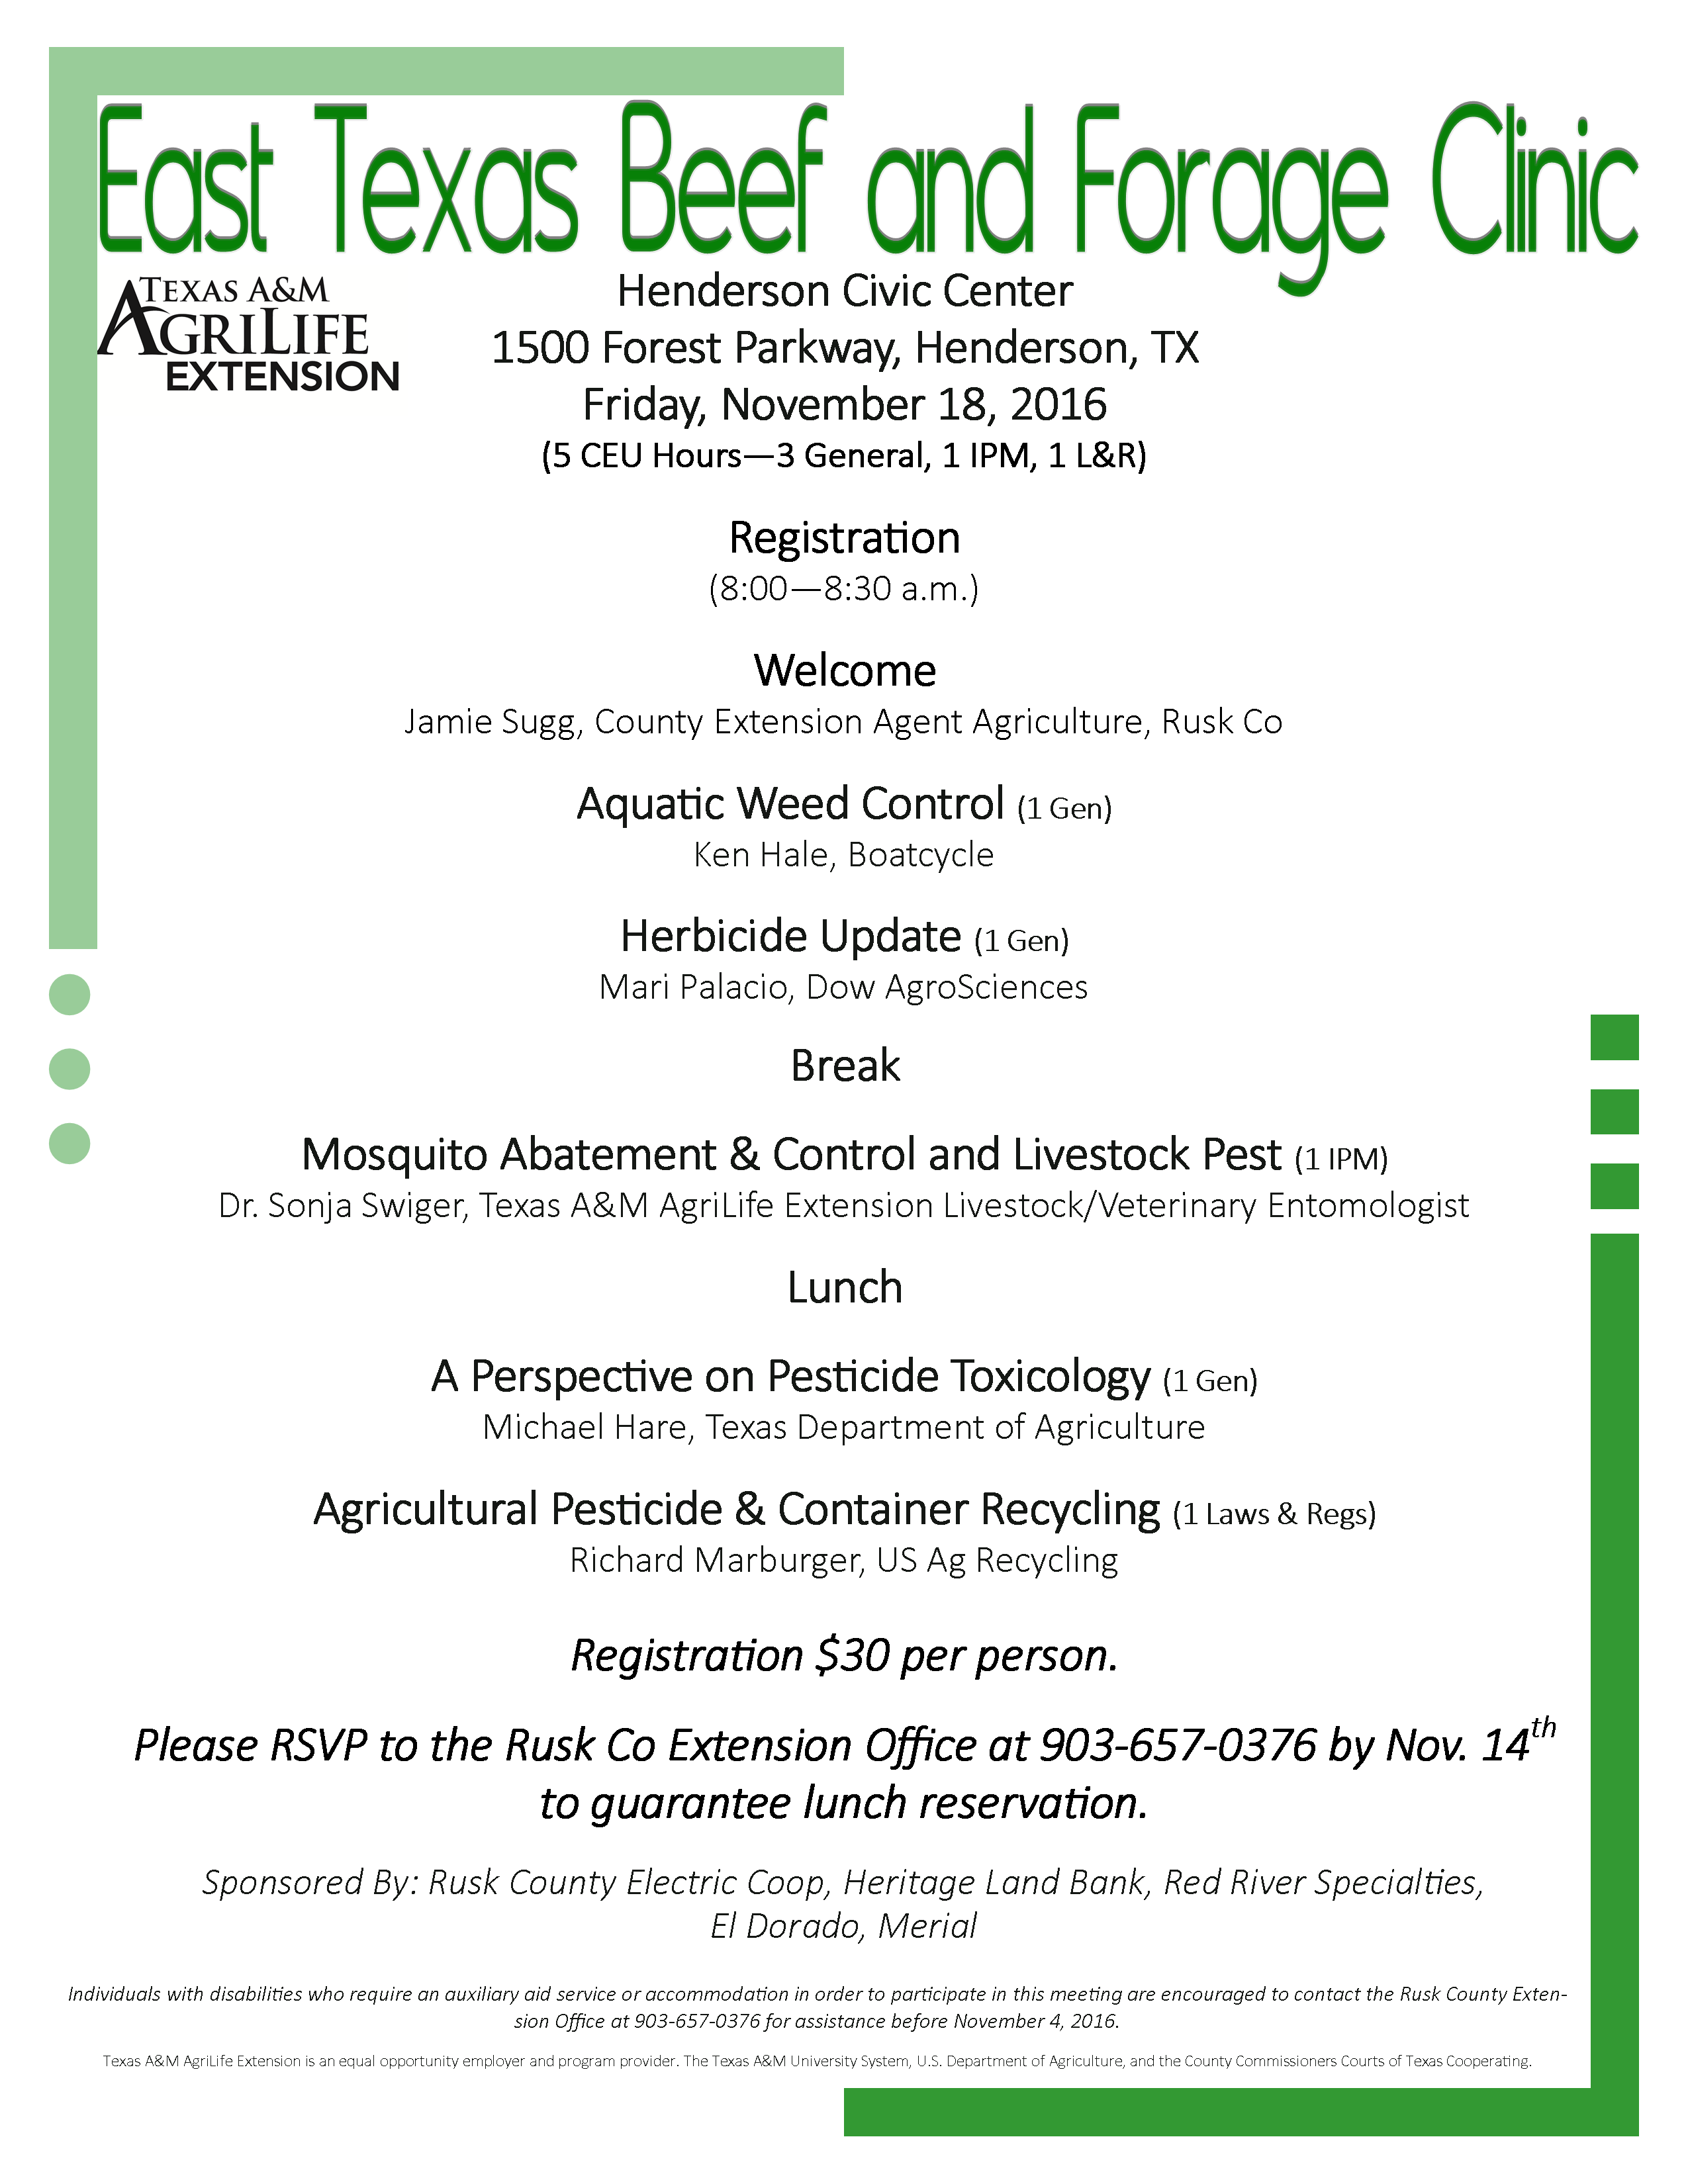 etx-beef-forage-clinic_11-18-16